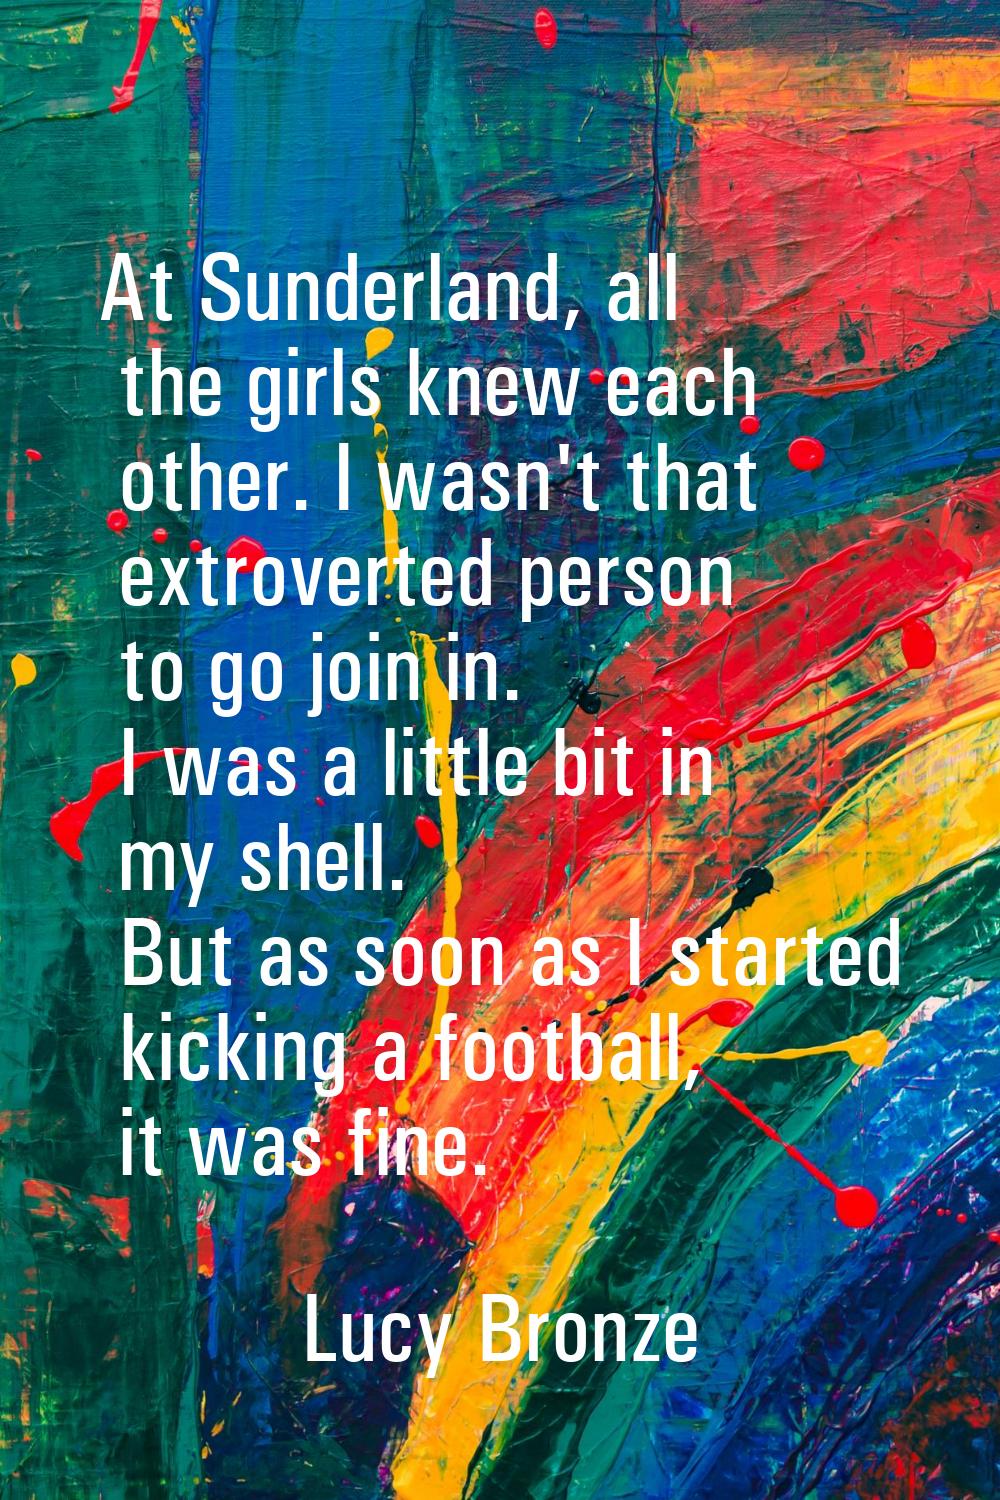 At Sunderland, all the girls knew each other. I wasn't that extroverted person to go join in. I was